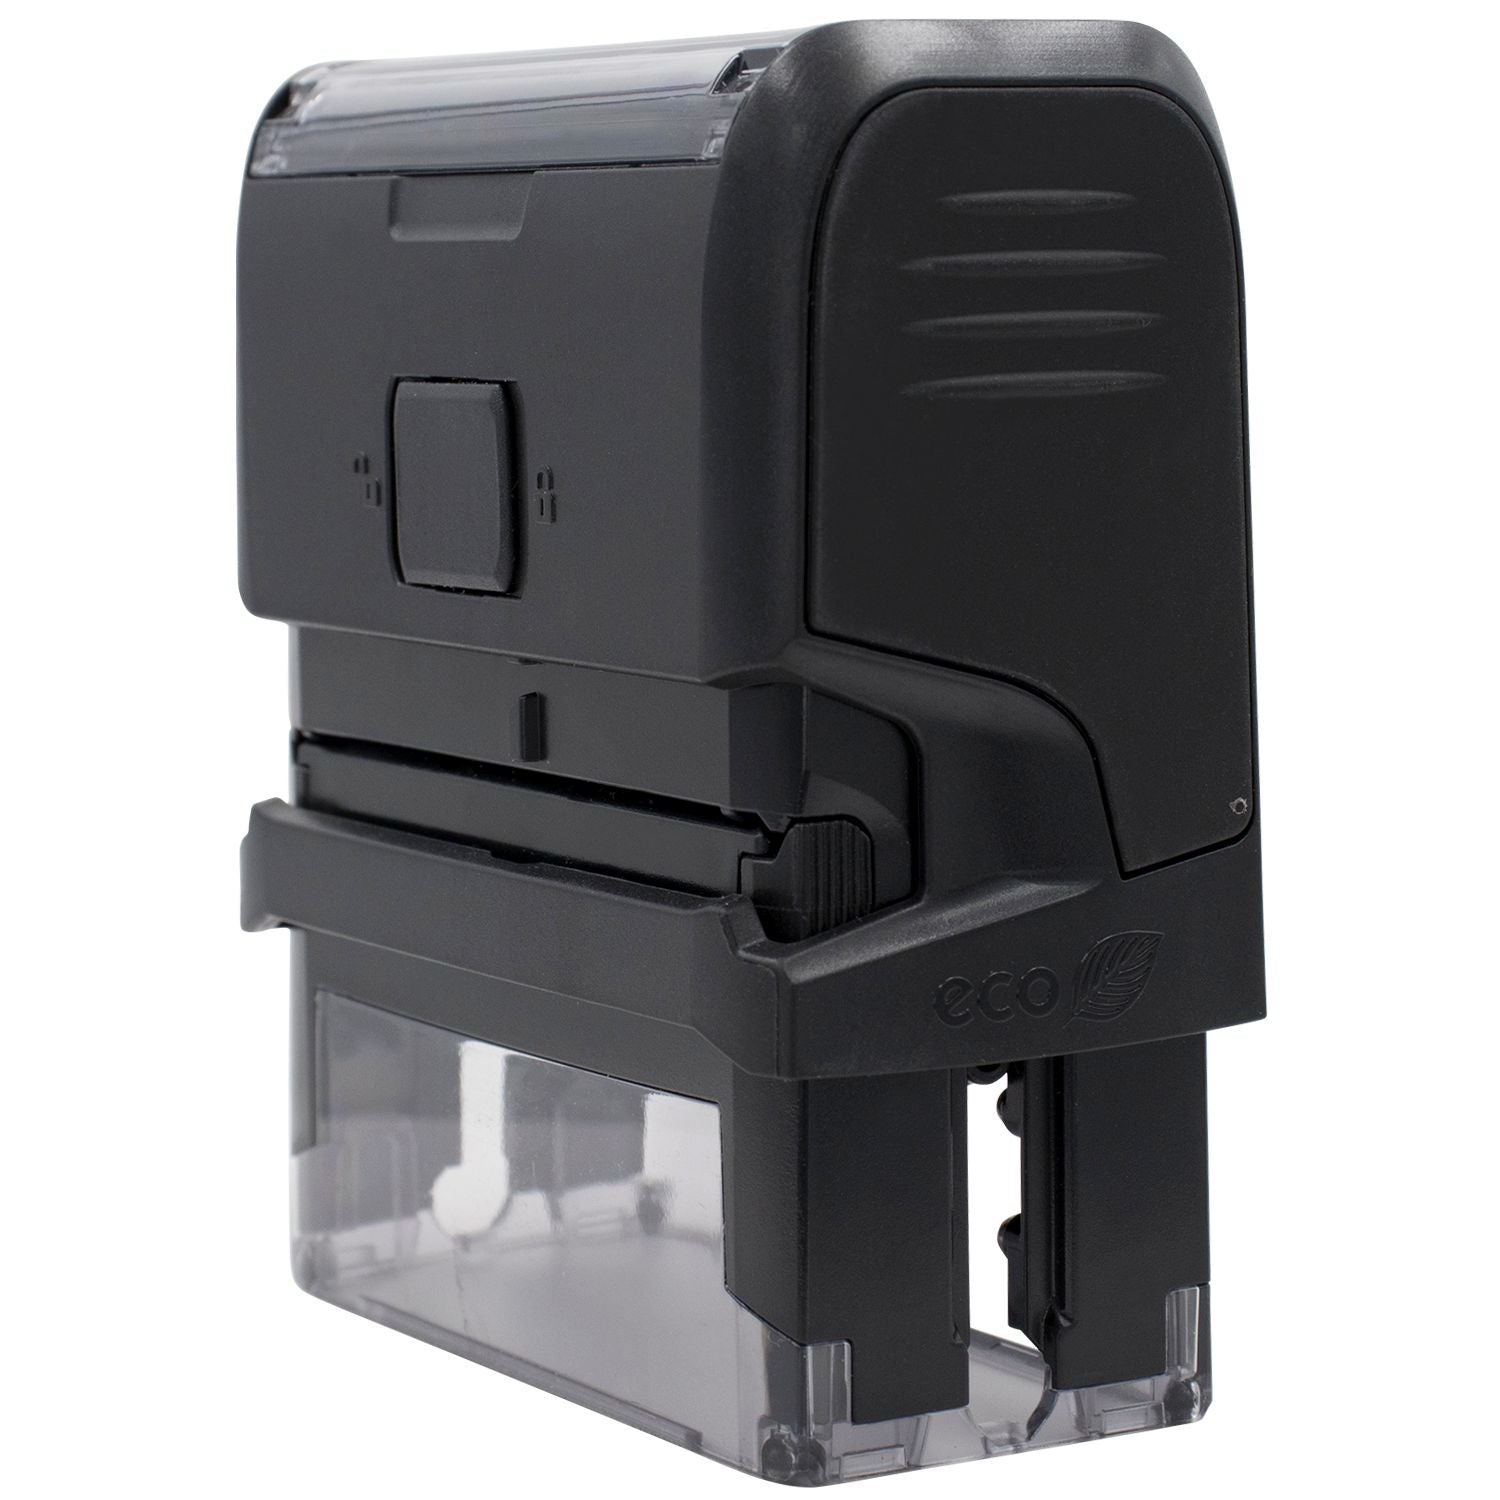 Side View of Large Self Inking Trust Stamp at an Angle